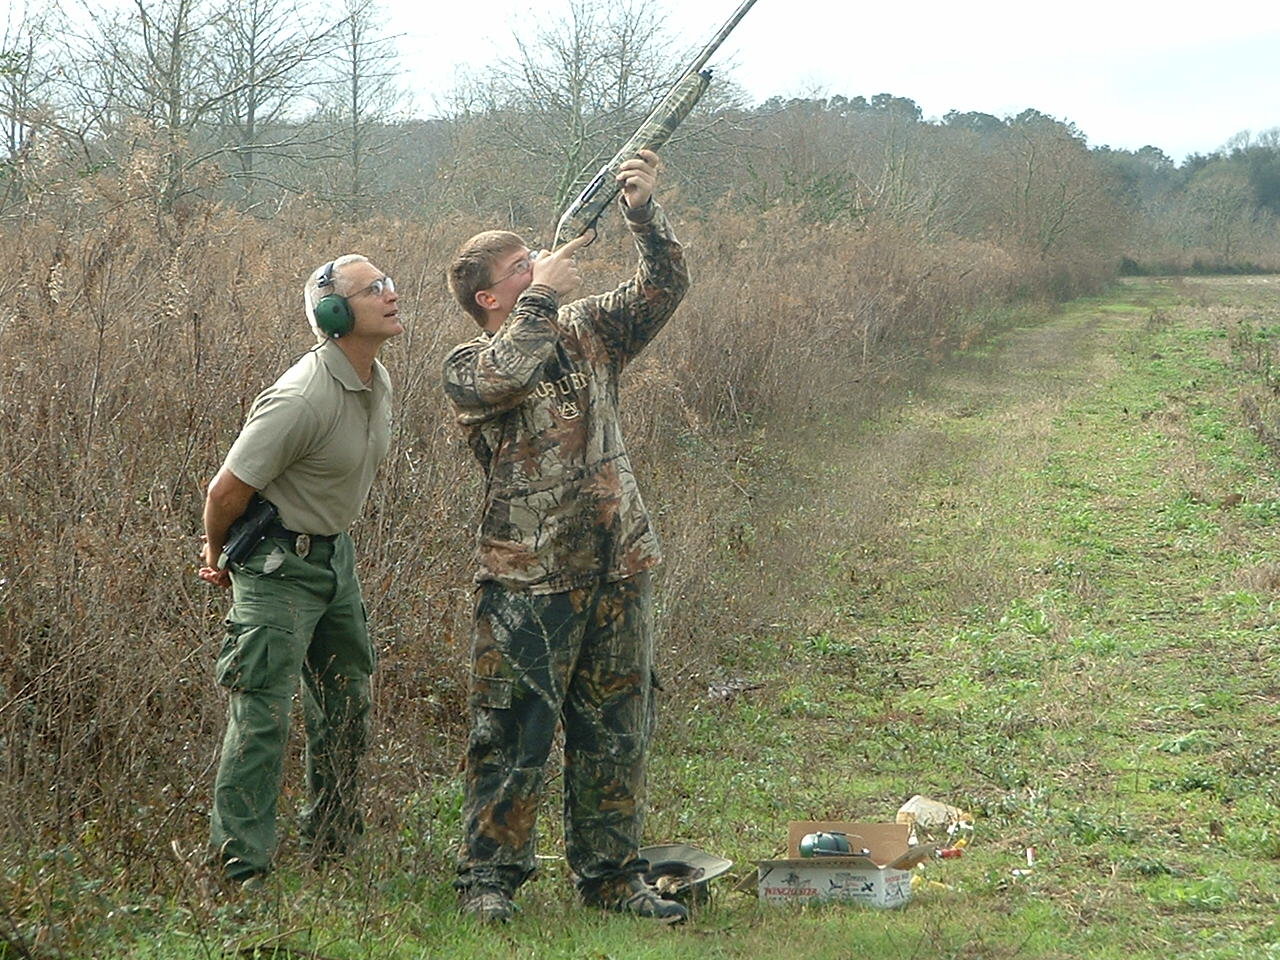 Due to unforeseen circumstances, the annual Orange Beach Youth Dove Hunt that was scheduled for Nov. 14 will now be held in conjunction with the Annual Clay Shoot Saturday, Dec. 19 at Alligator Alley in Summerdale. 